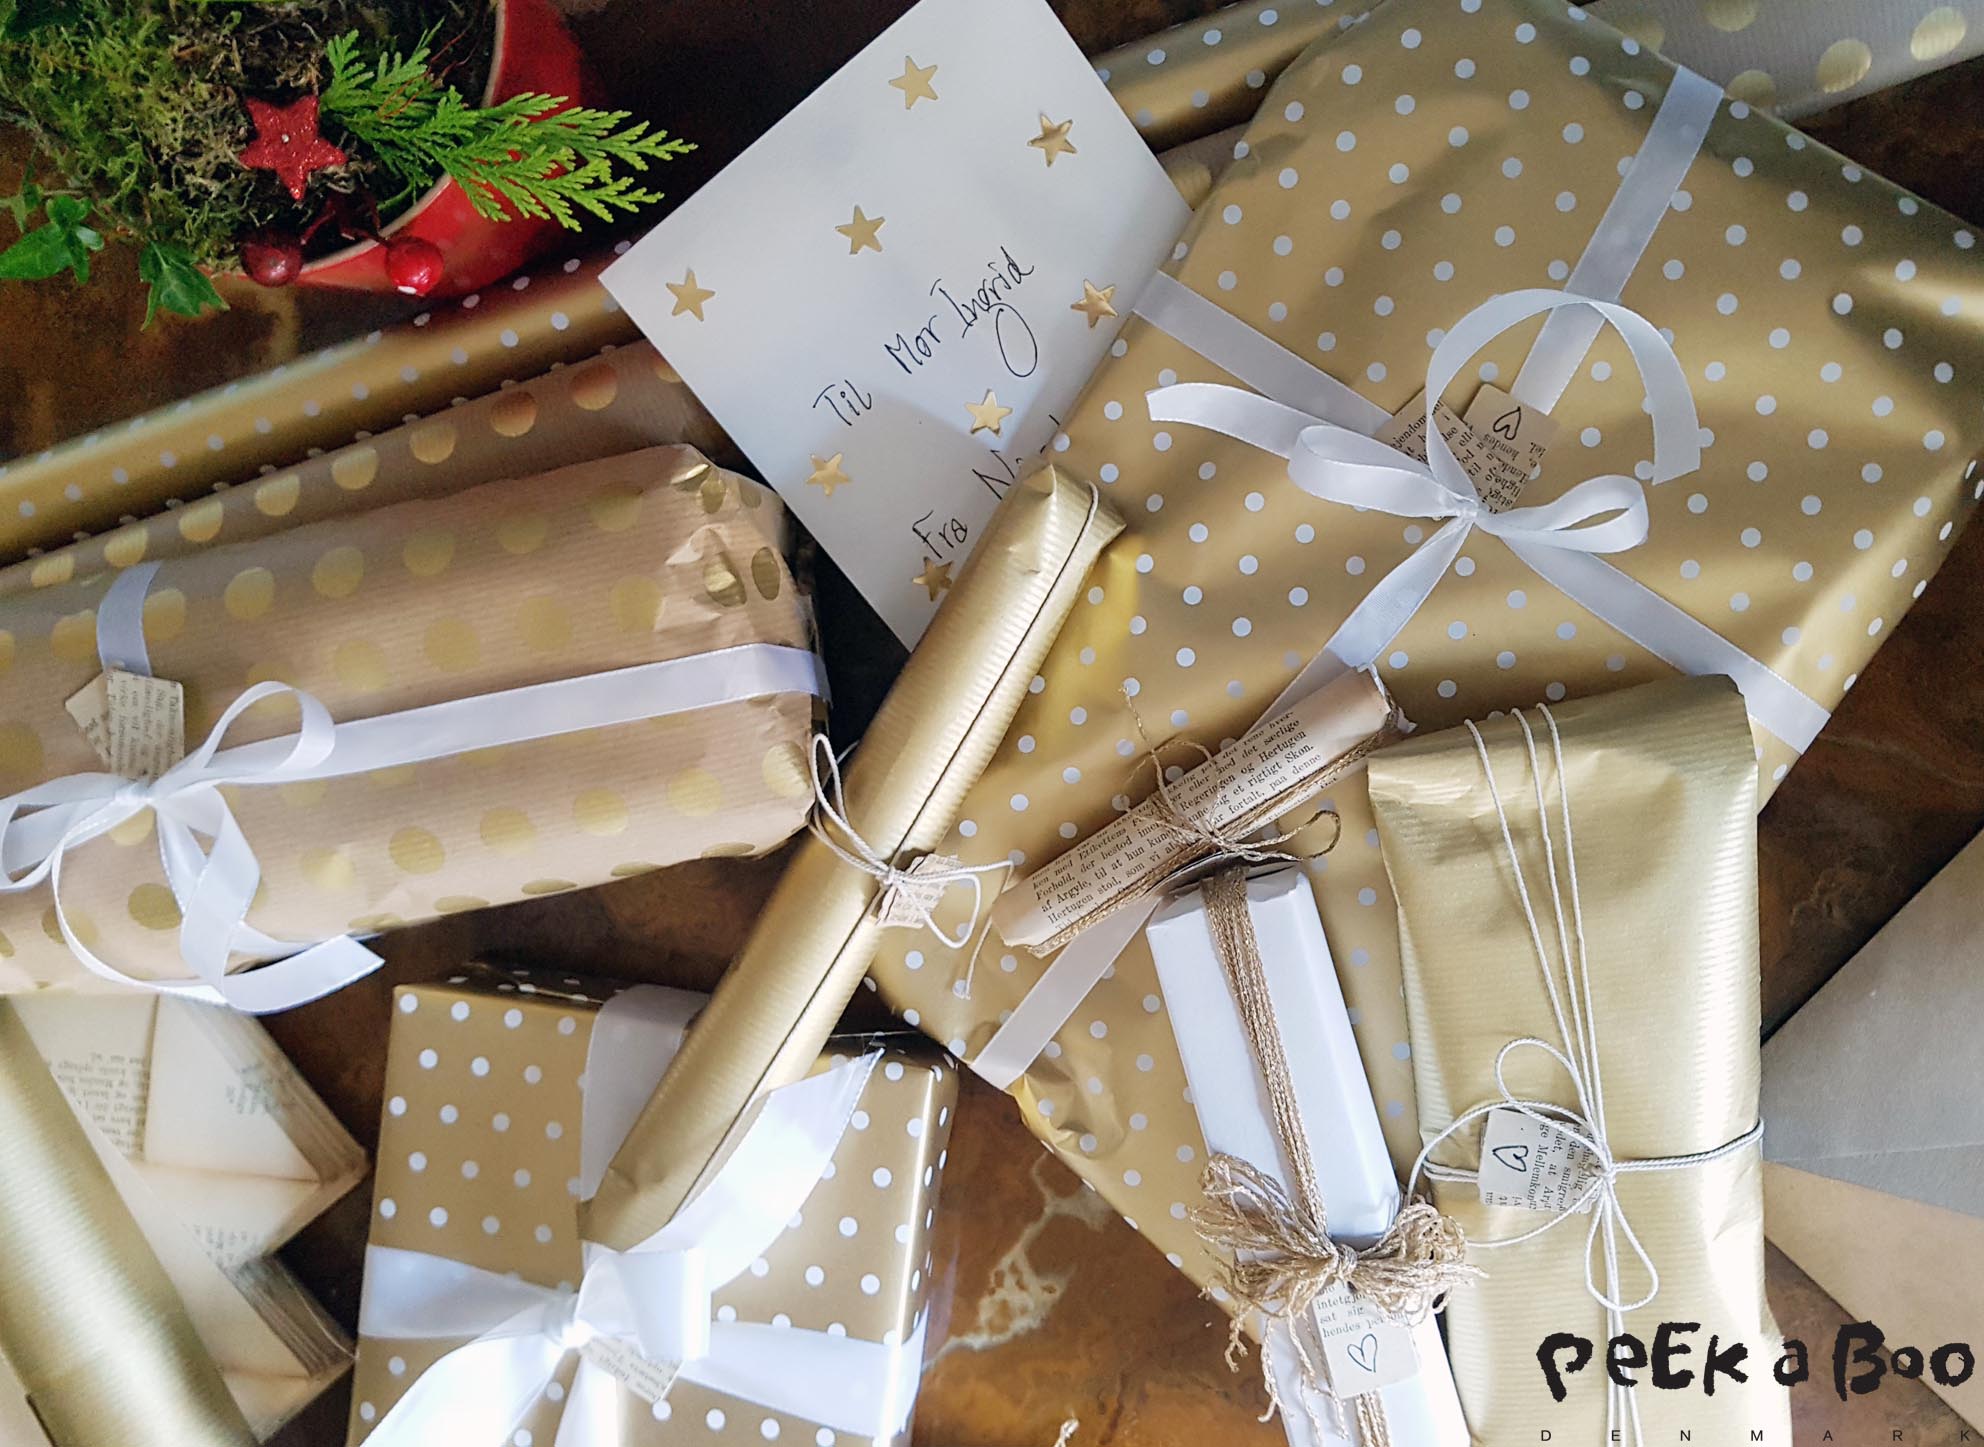 DIY gift wrapping in gold and white.